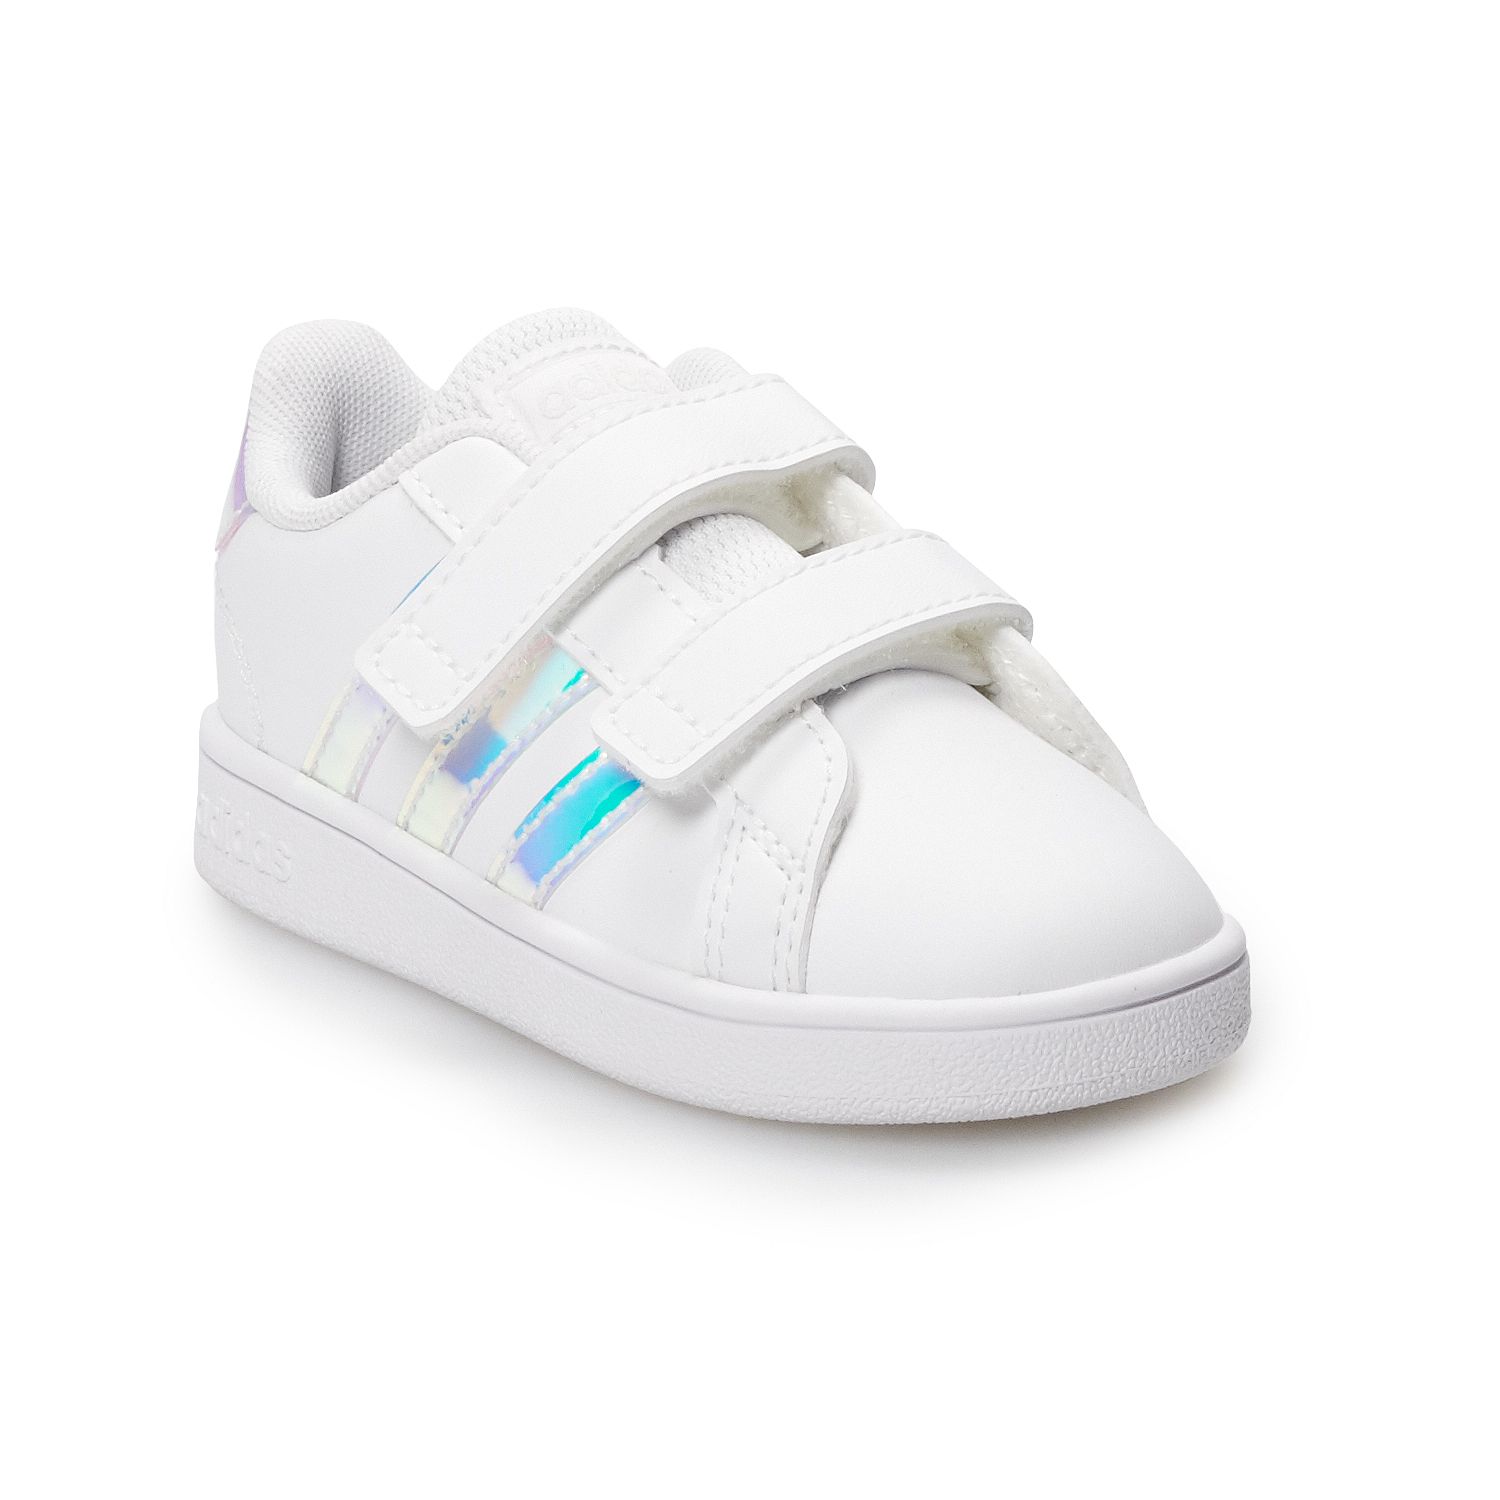 Photo 1 of adidas Grand Court Toddler Girls' Sneakers 7K